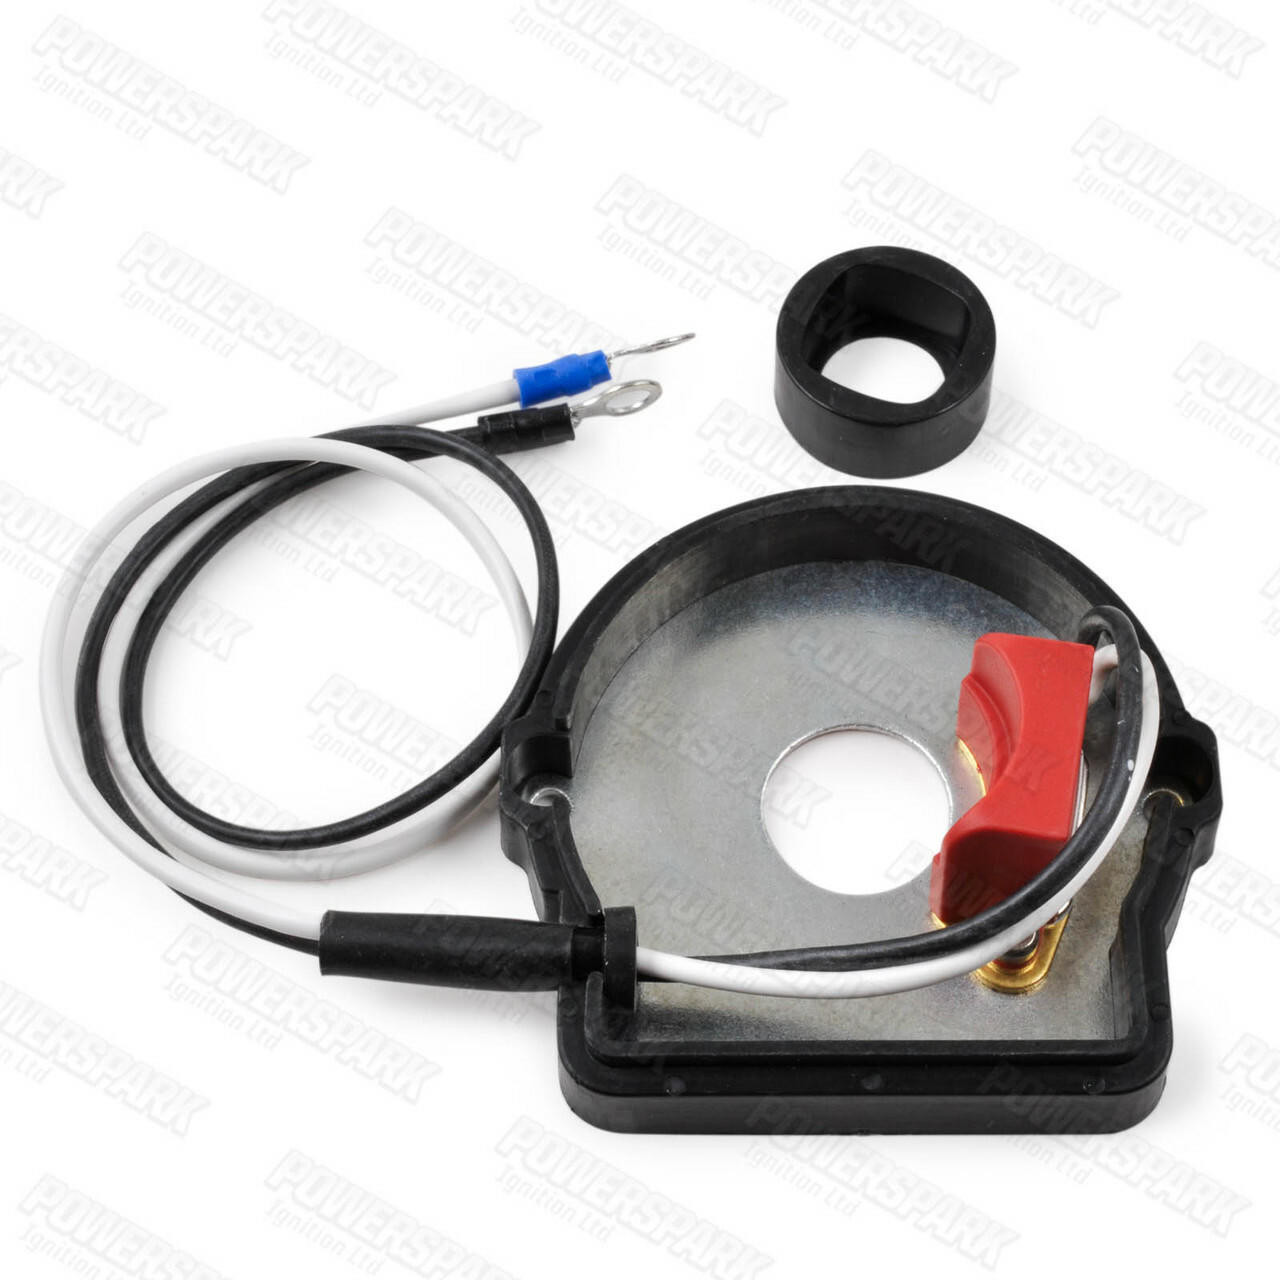 Powerspark Powerspark Electronic Ignition Kit for Lucas DK4A Distributor Positive Earth KDA1PP